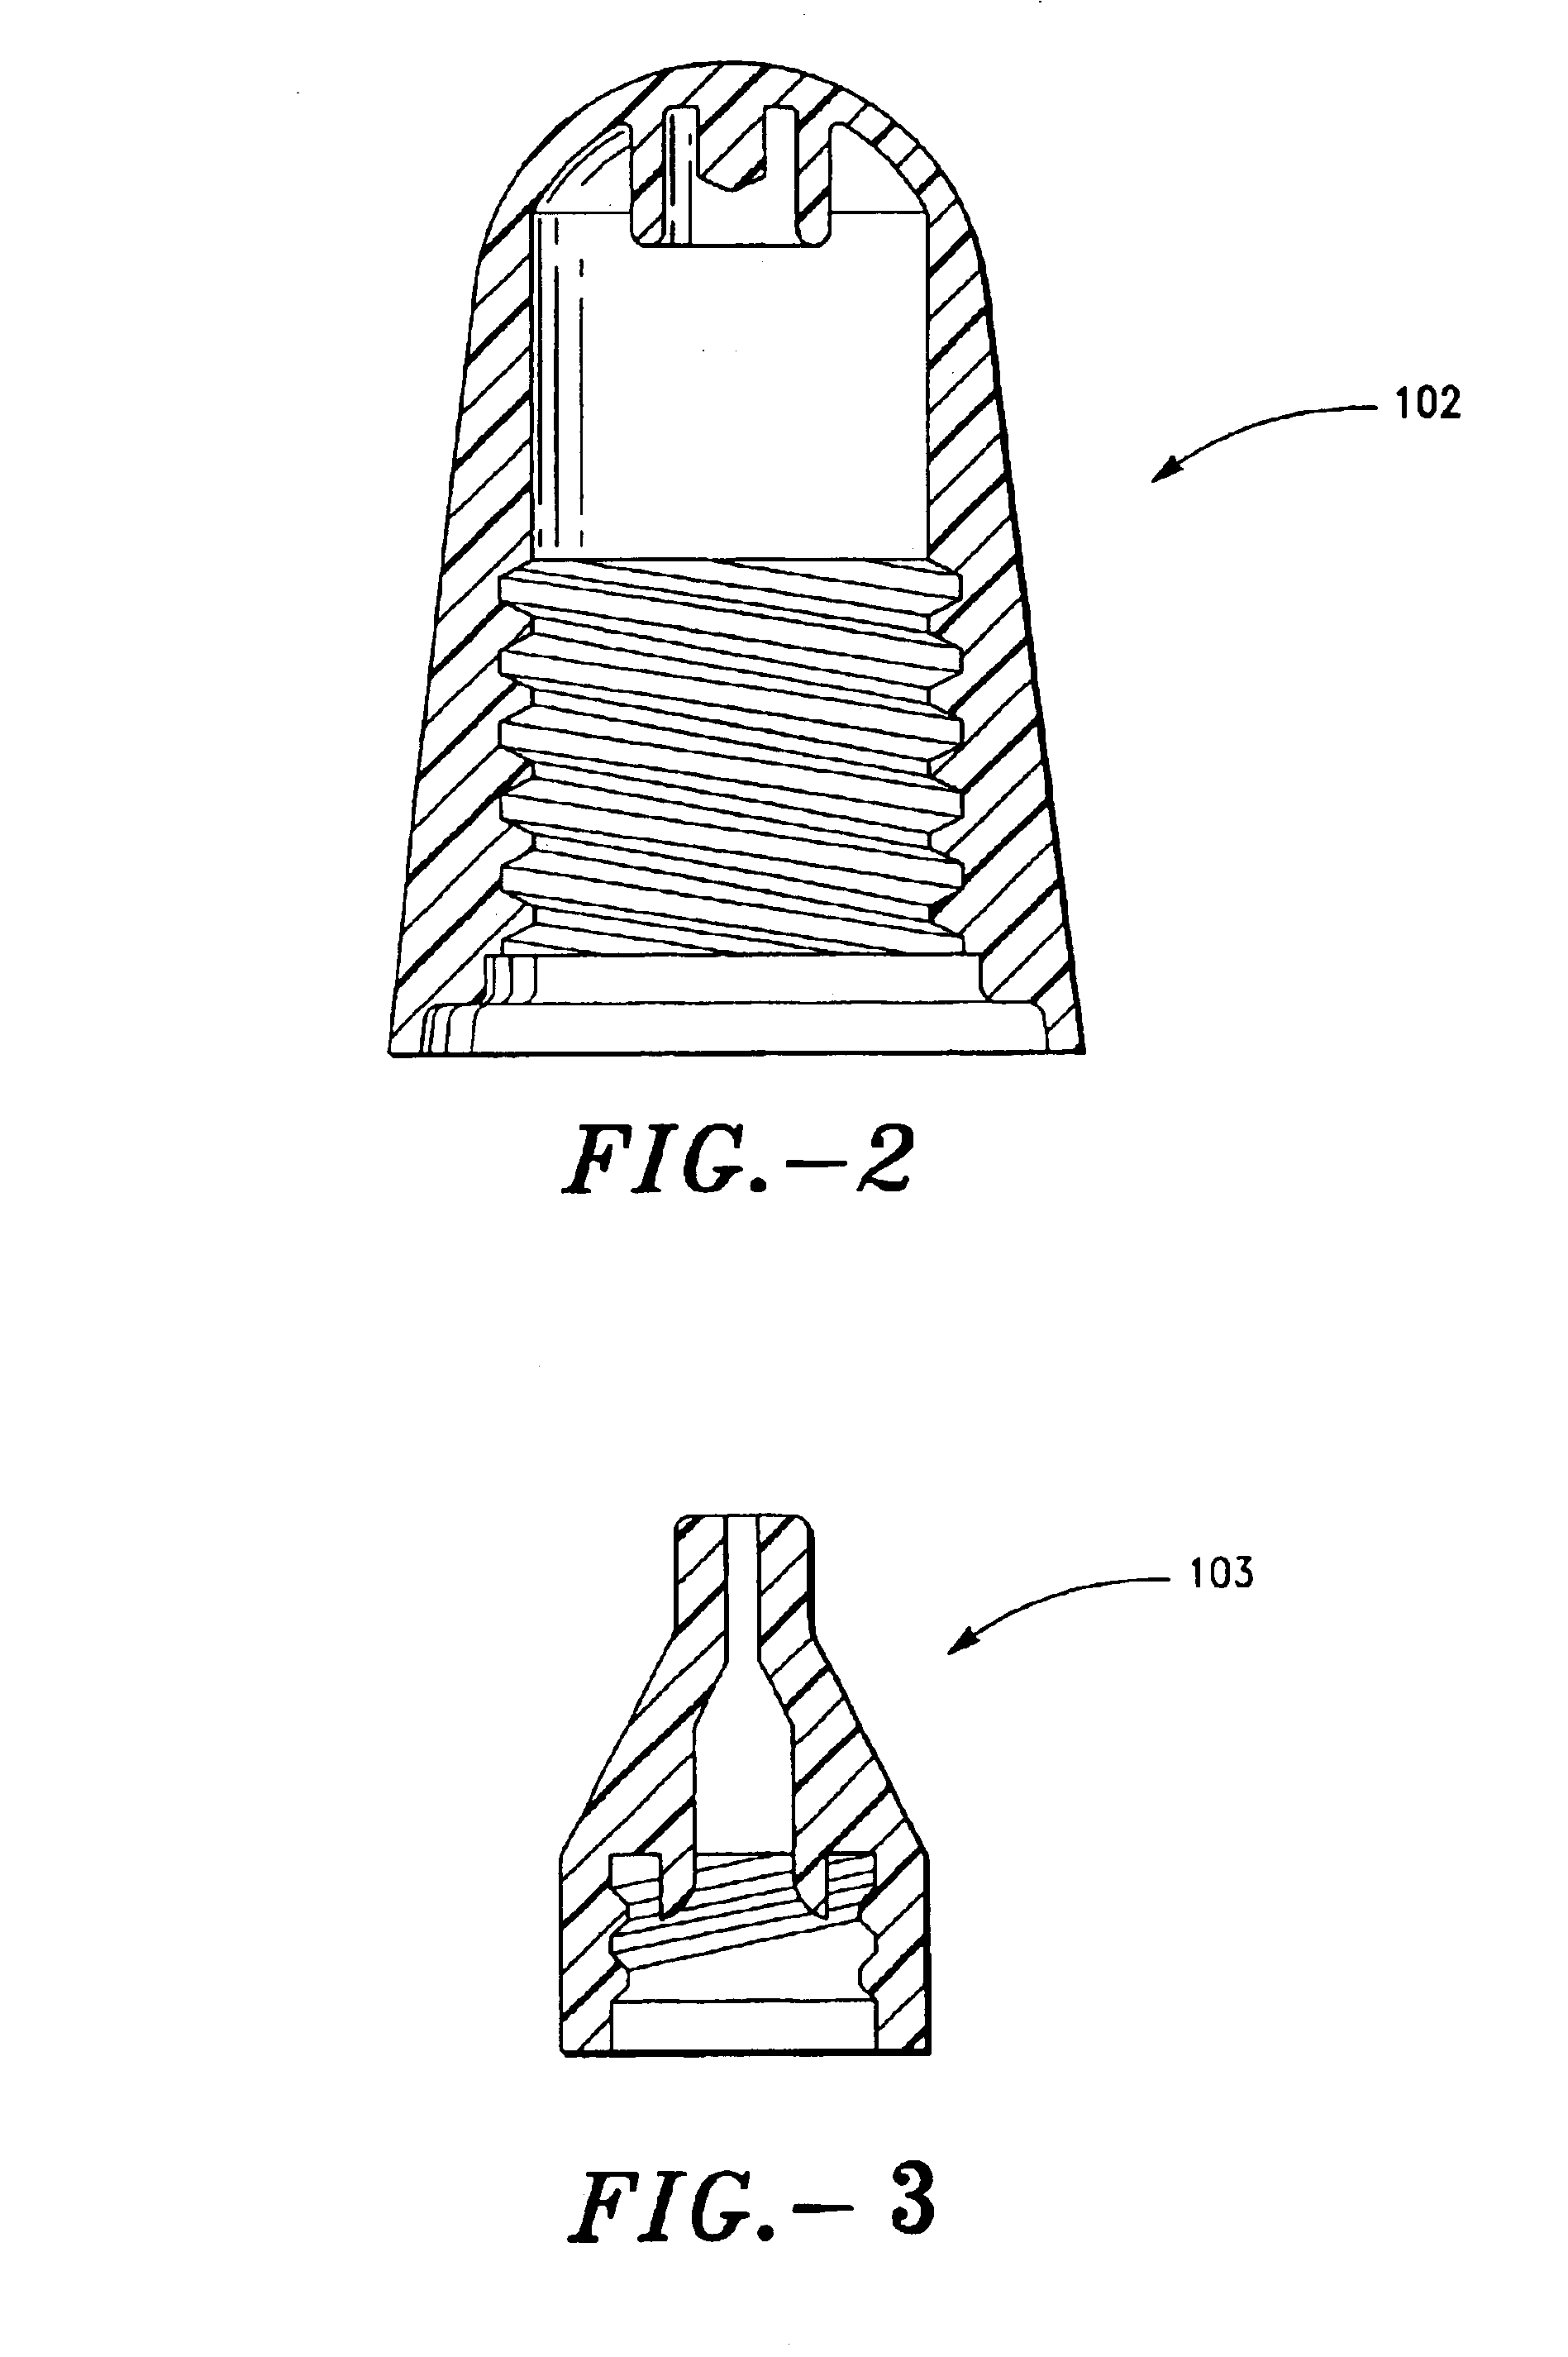 Method and device for delivery and confinement of surface cleaning composition